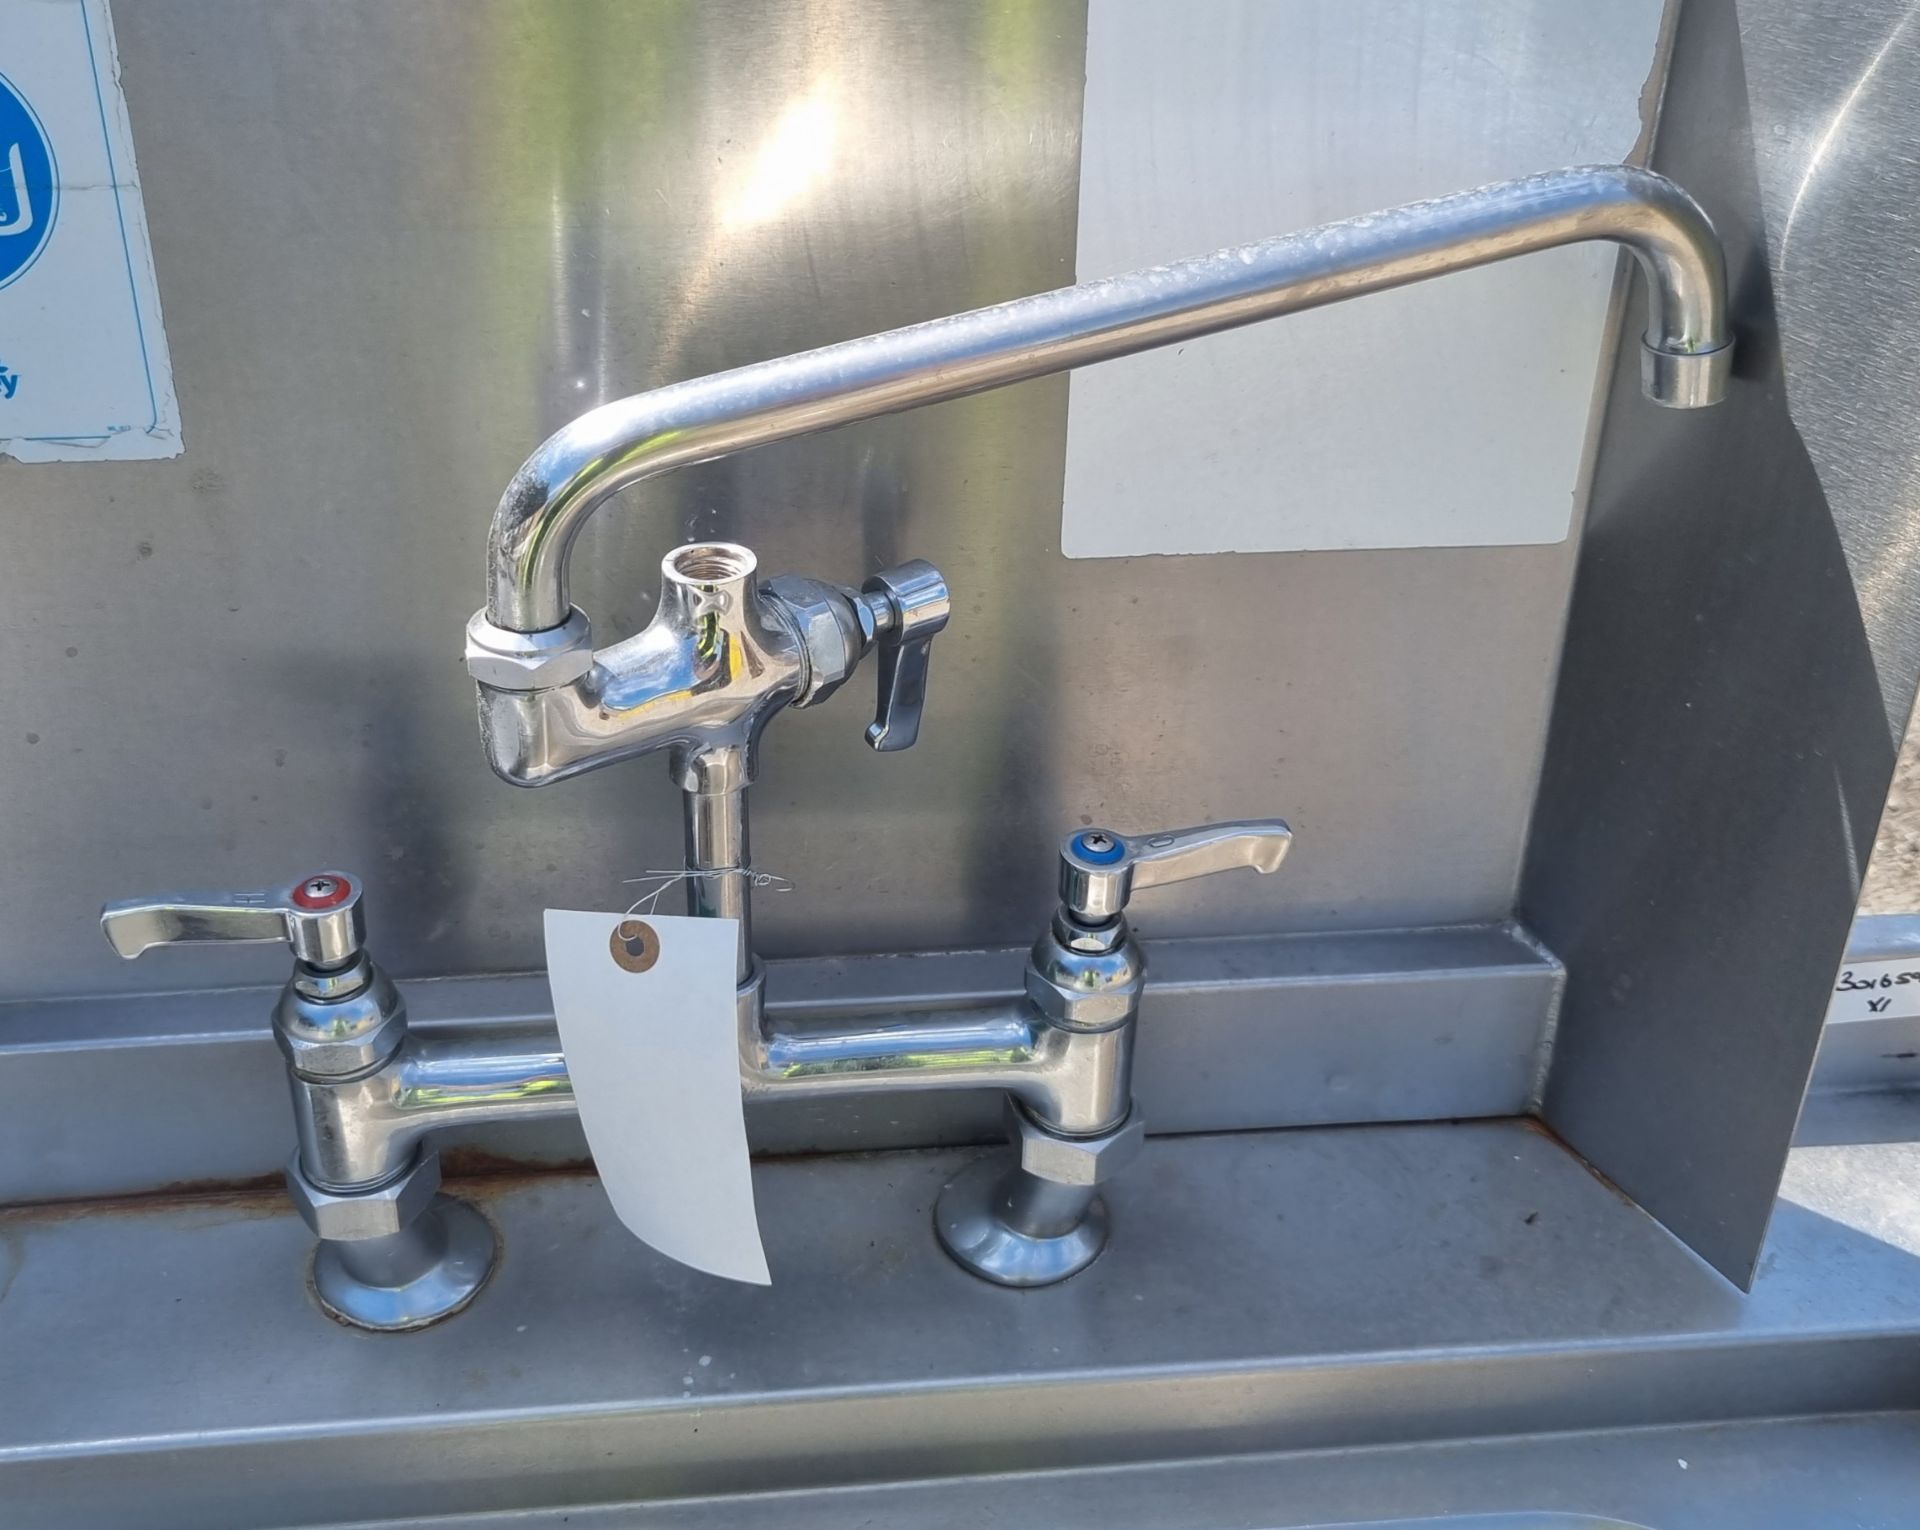 Stainless Steel Single sink unit - L150 x W80 x H128cm - Image 4 of 4